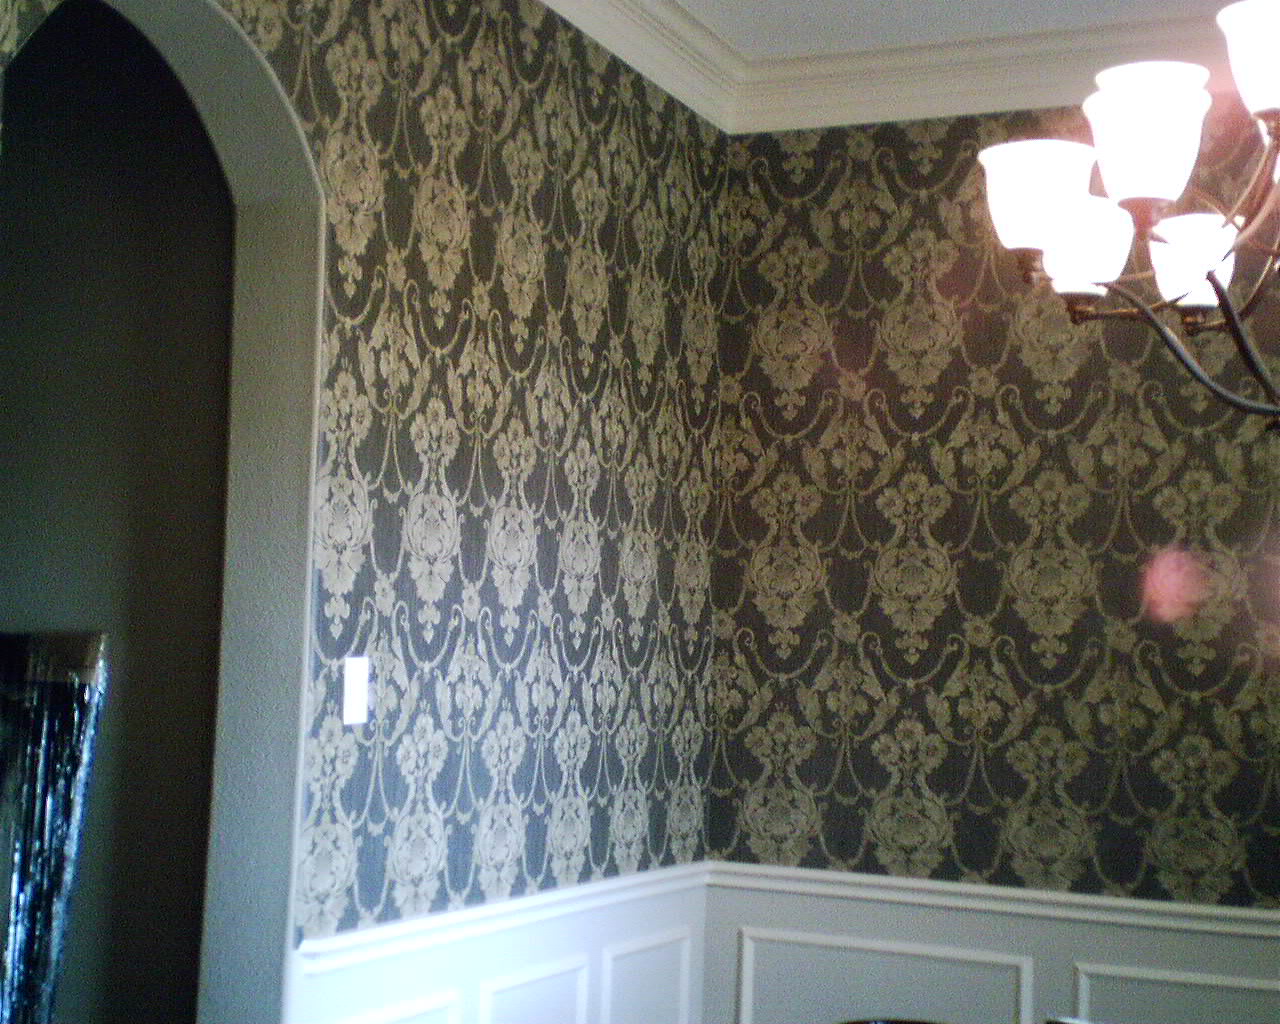 Classic Wallpaper Pattern in a Dining Room Today Wallpaperladys